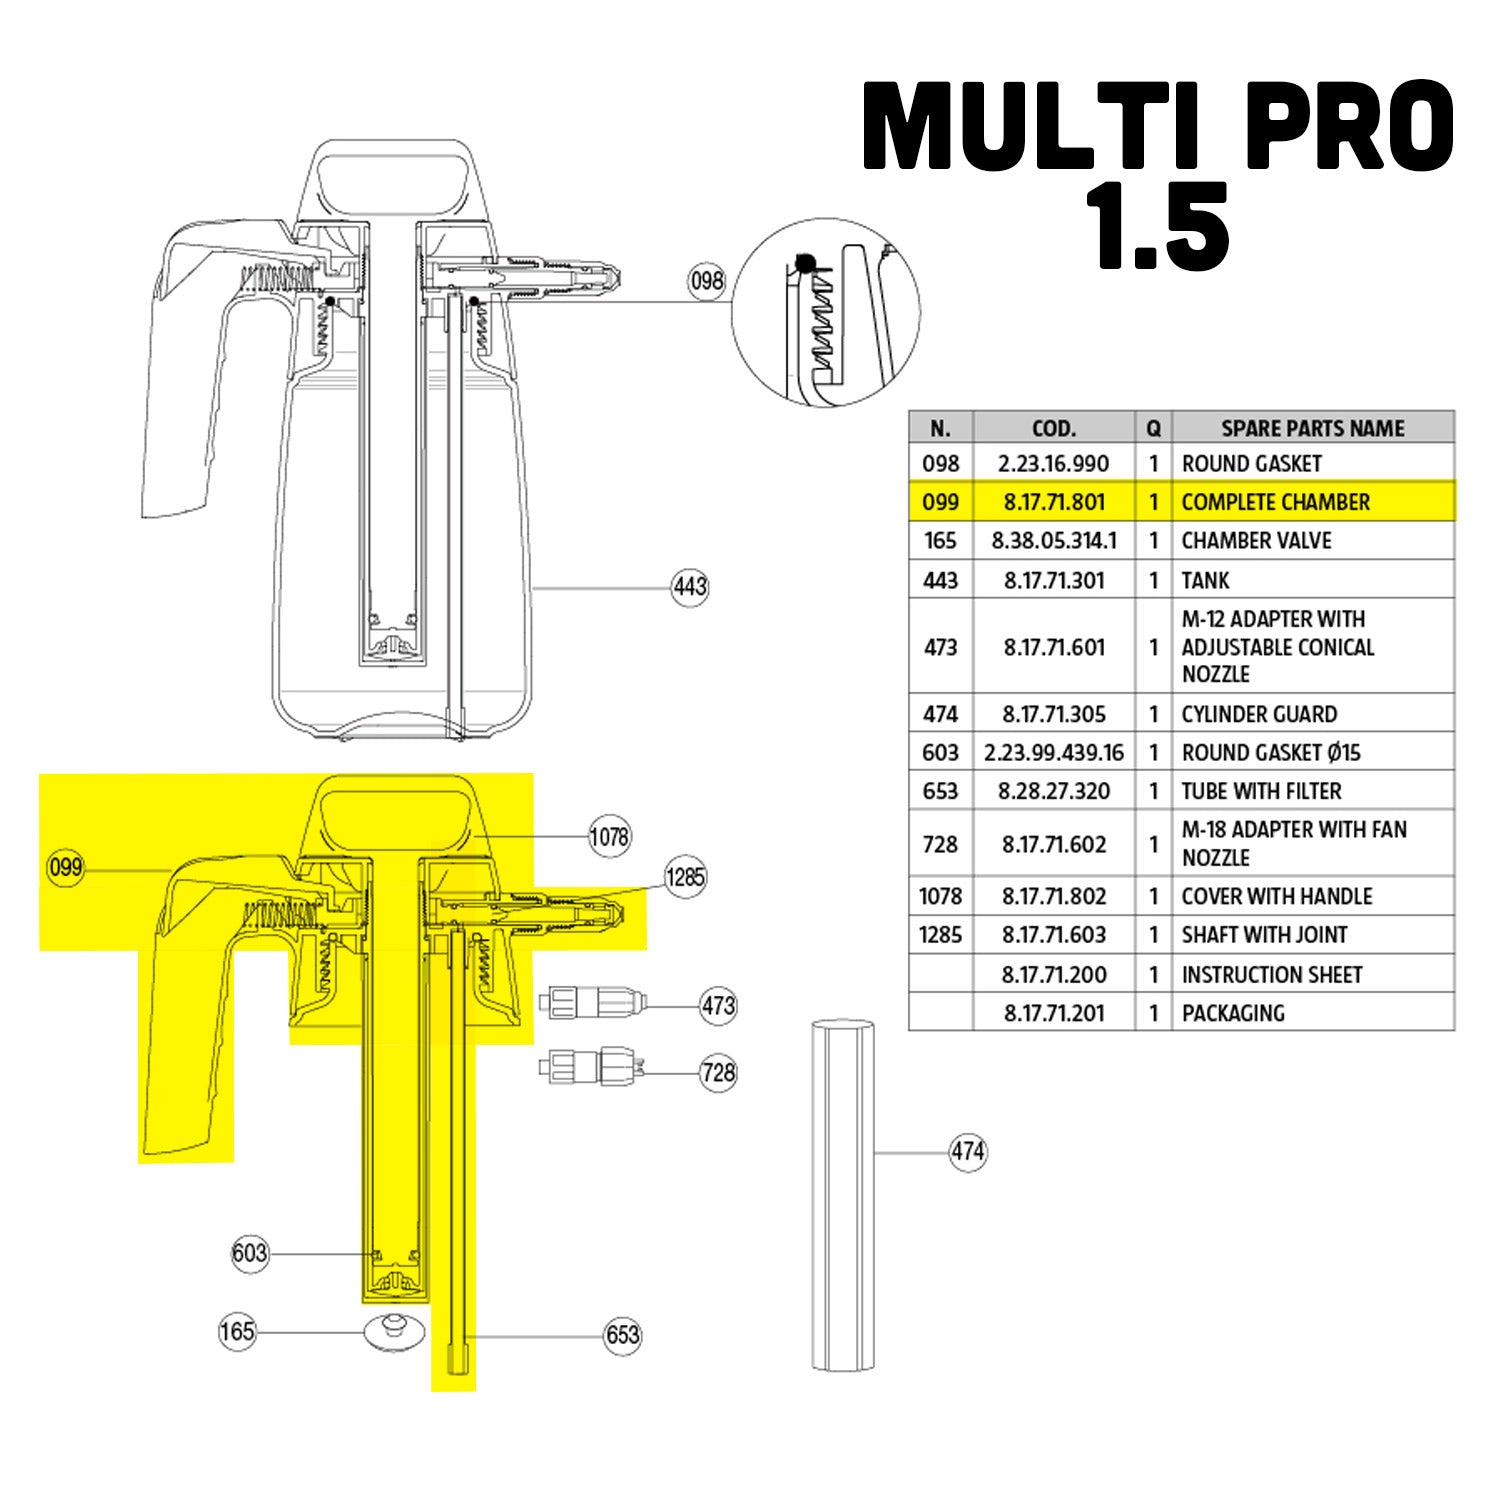 complete-chamber-parts-guide-multi-1-5